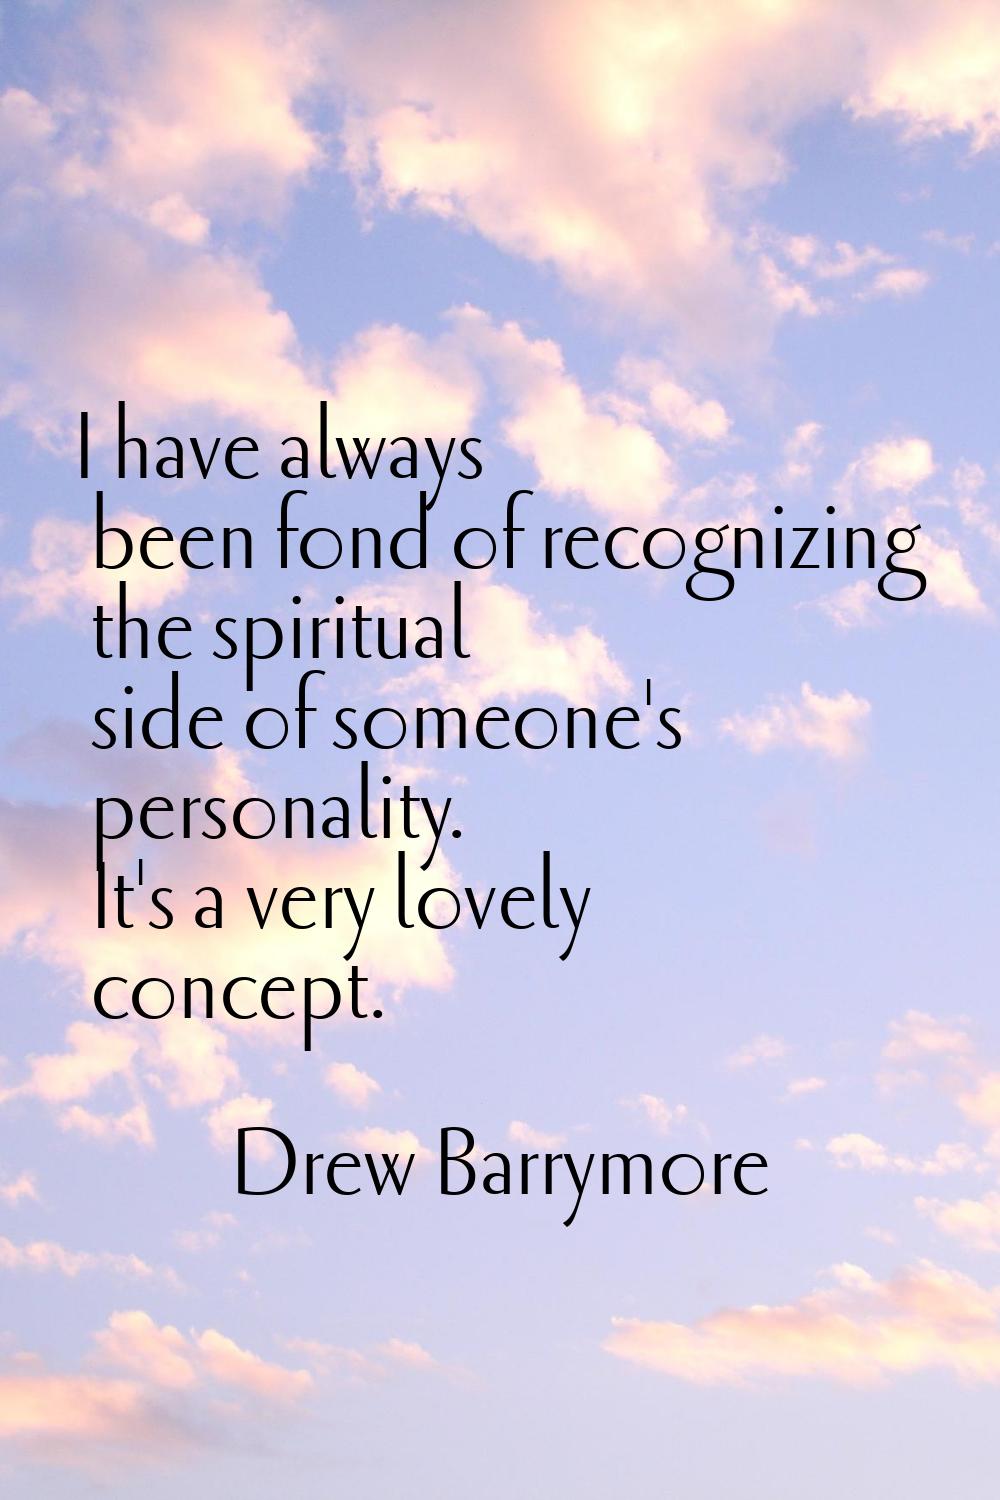 I have always been fond of recognizing the spiritual side of someone's personality. It's a very lov